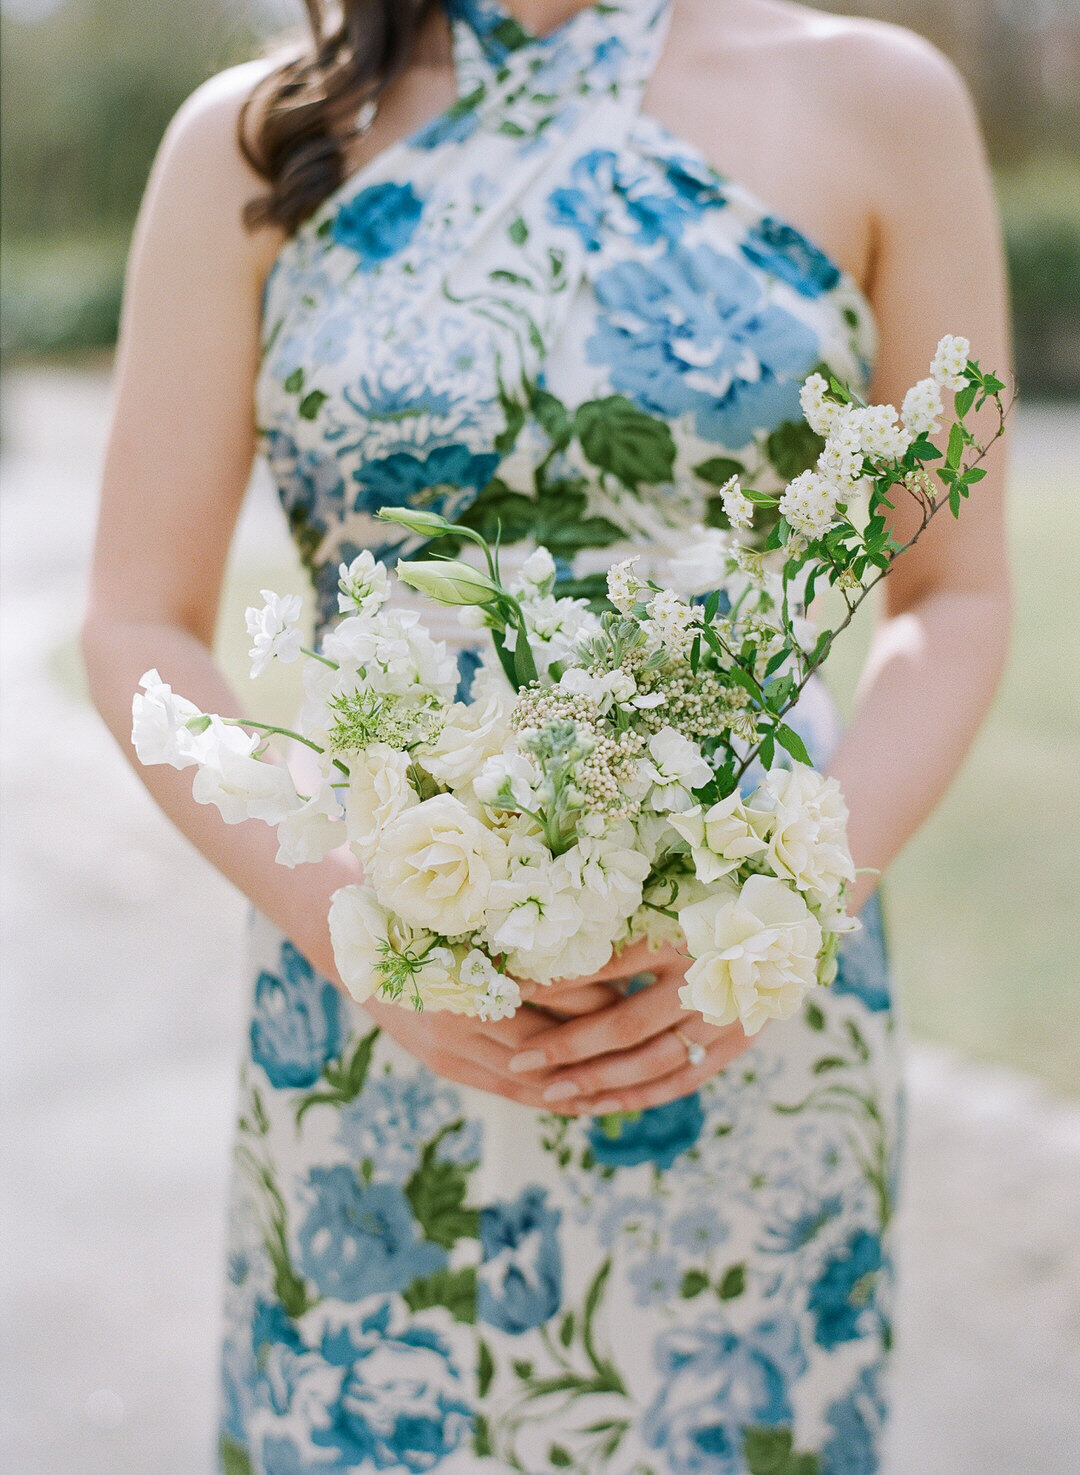 Maid of Honor in Blue floral dress holding bouquet